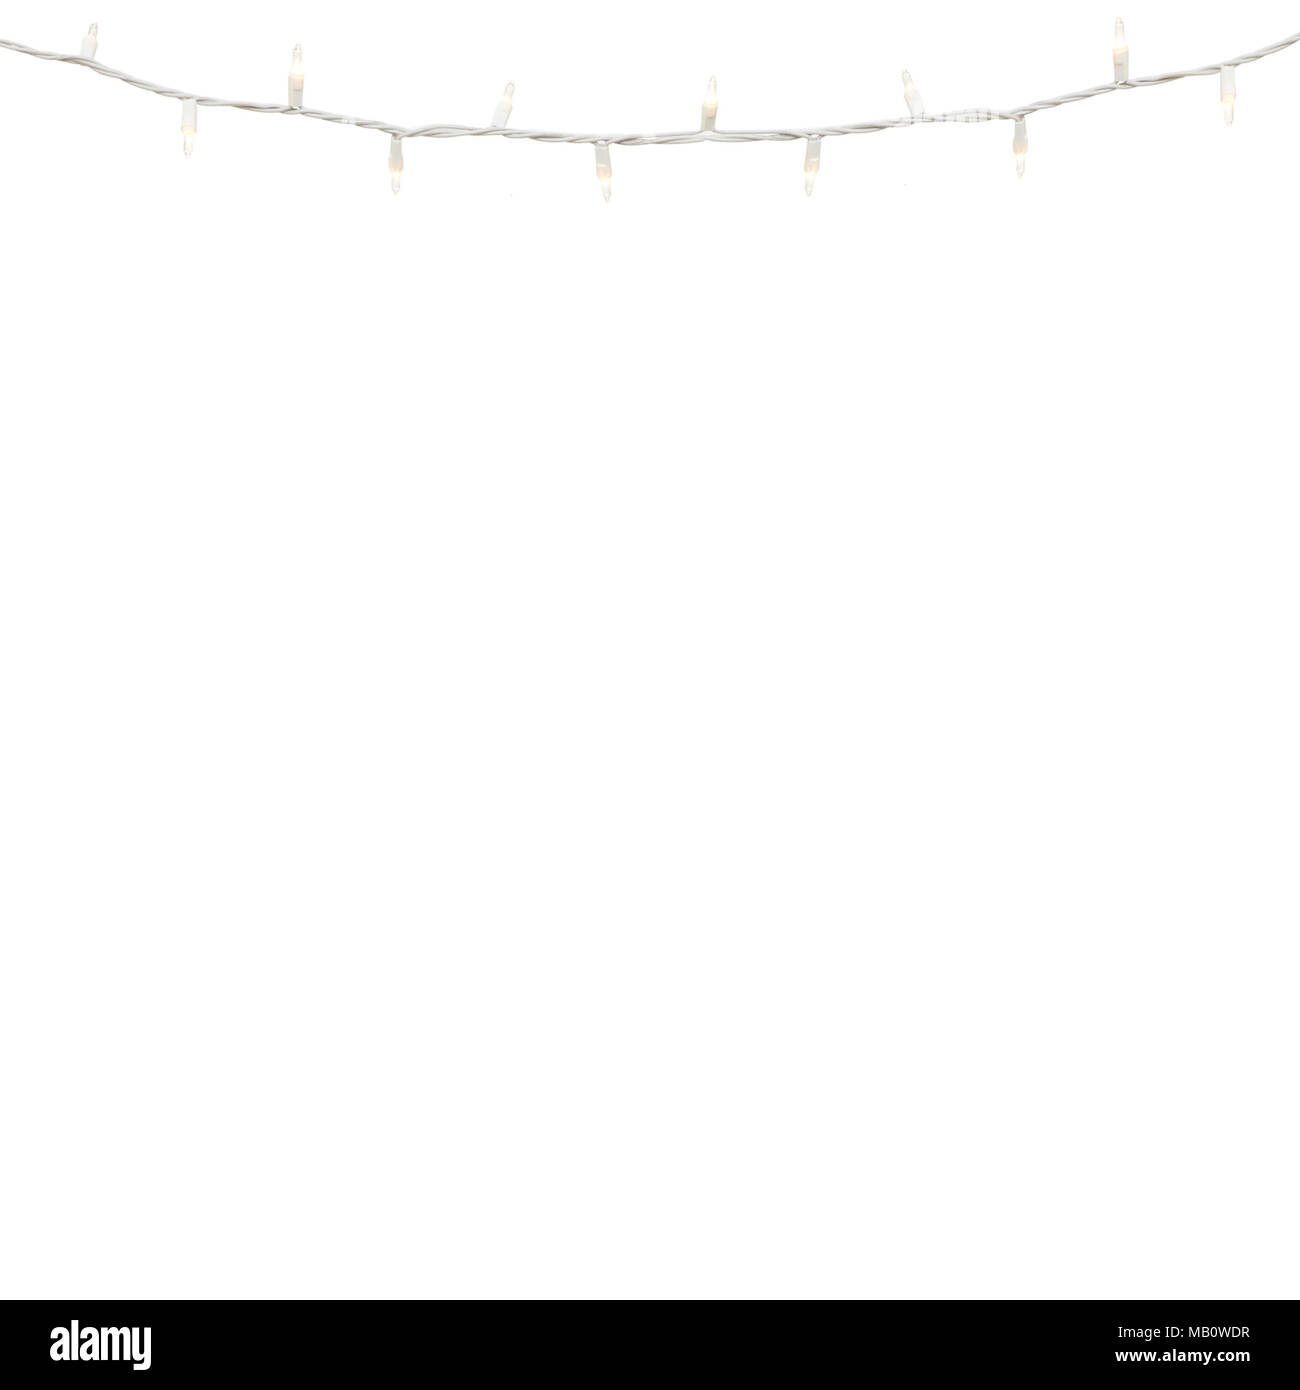 Plain white background with copy space and white string lights at the top for holiday decorations Stock Photo